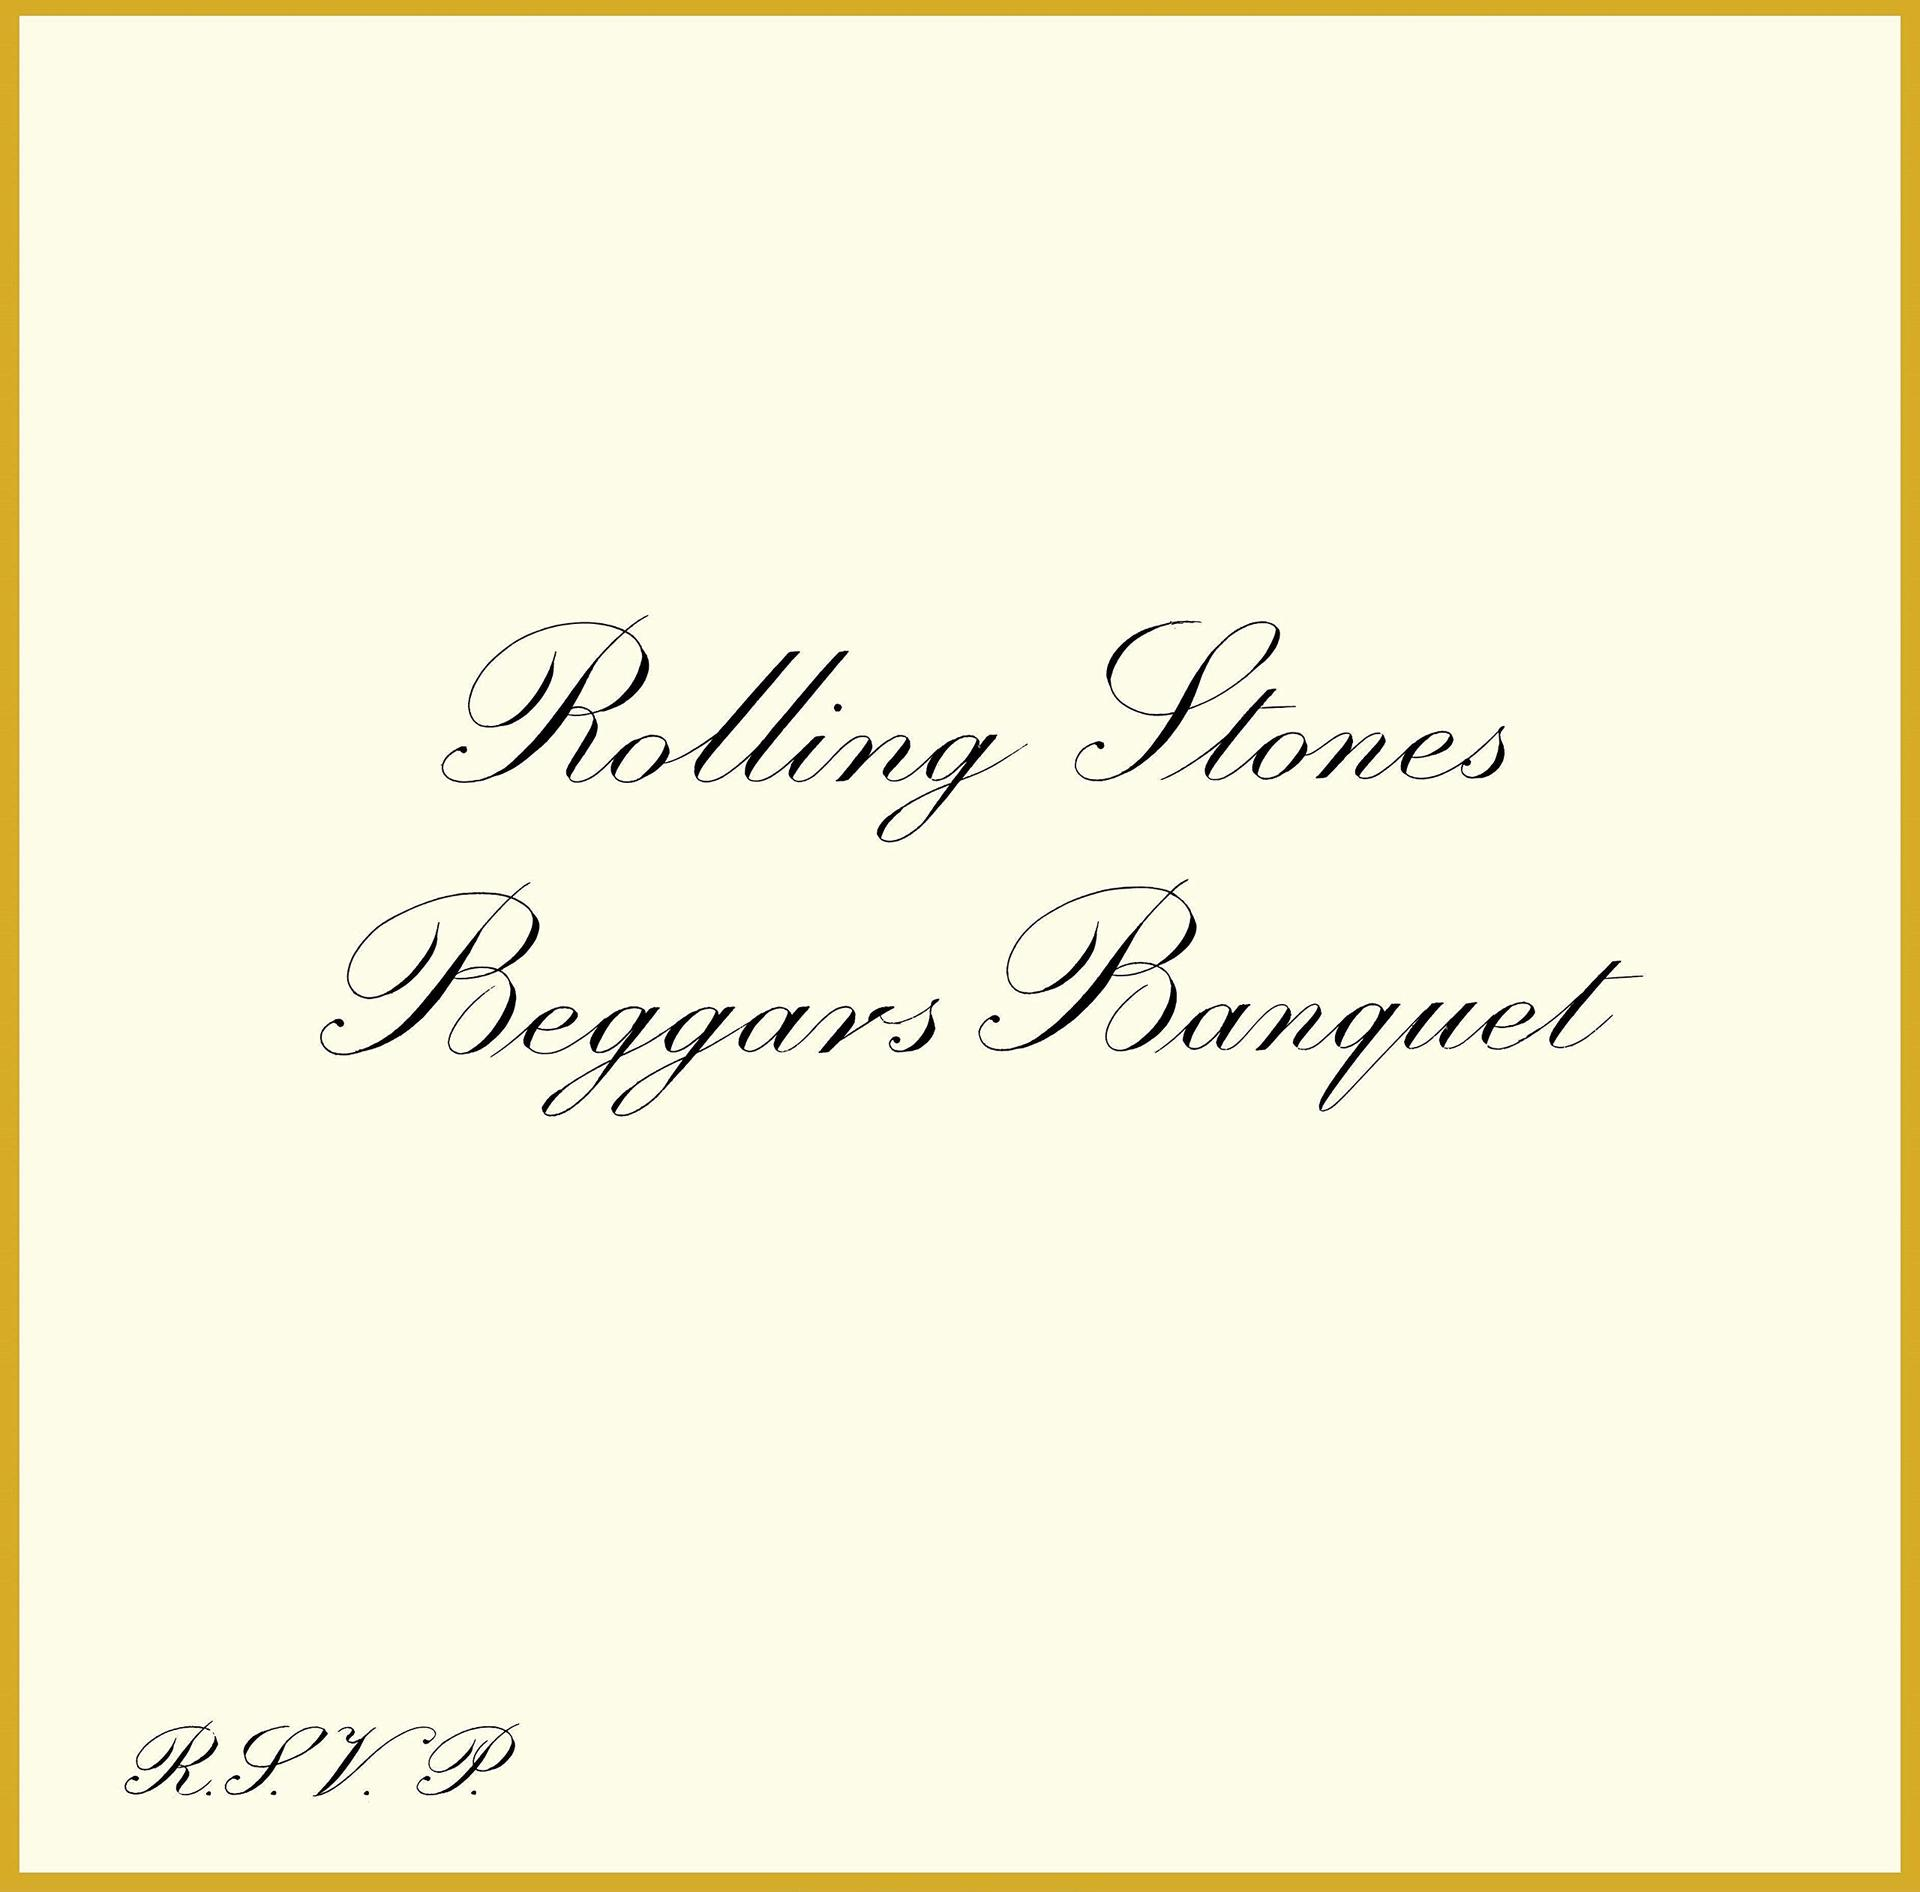 The Rolling Stones - Beggars Anniversary Edition - Banquet (CD) 50th